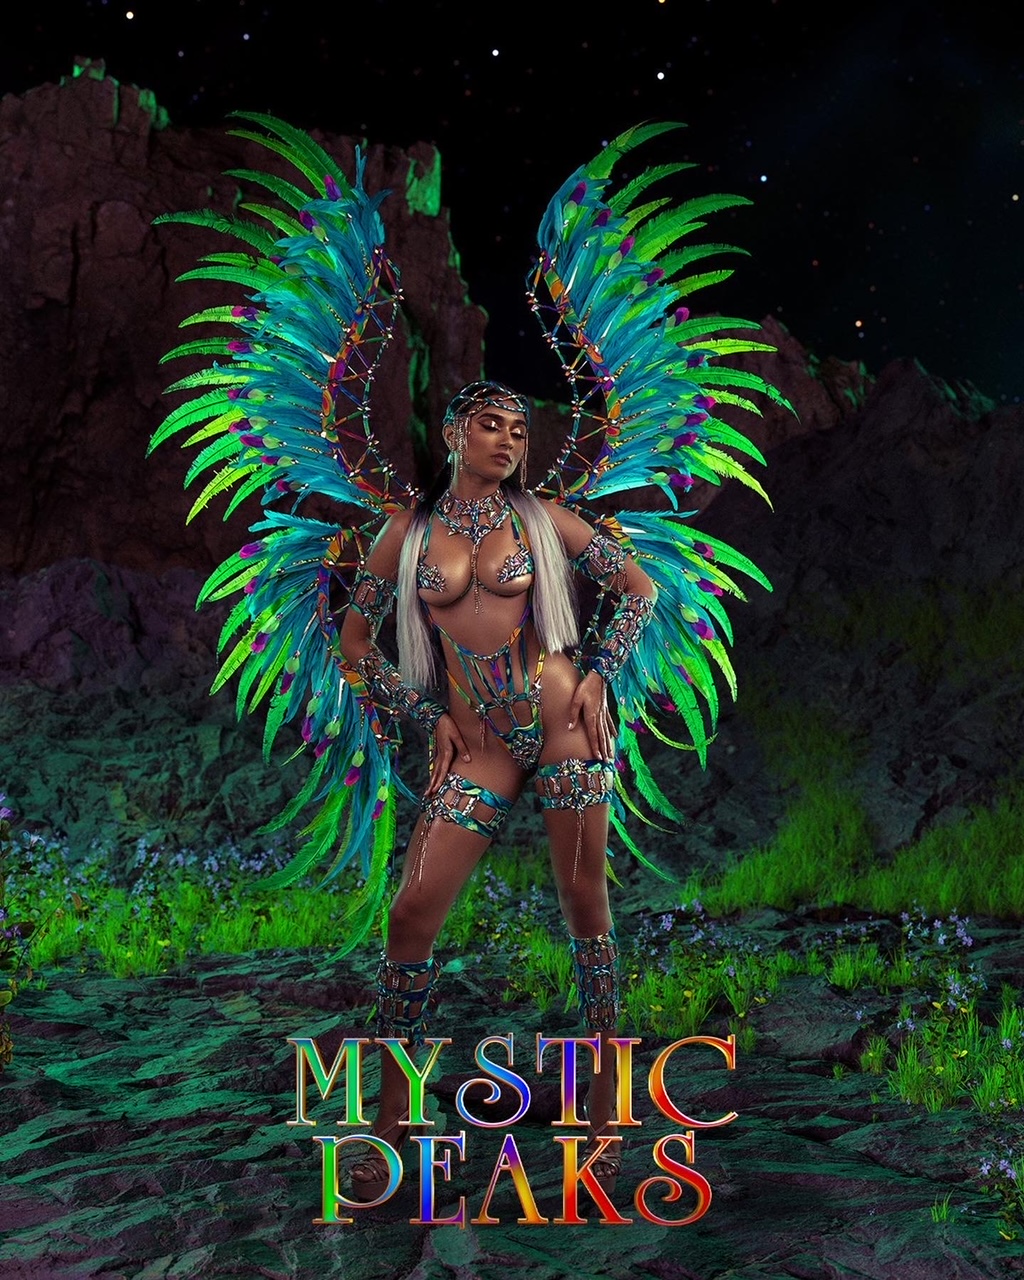 The frontline costume of GENXS' Mystic Peaks section